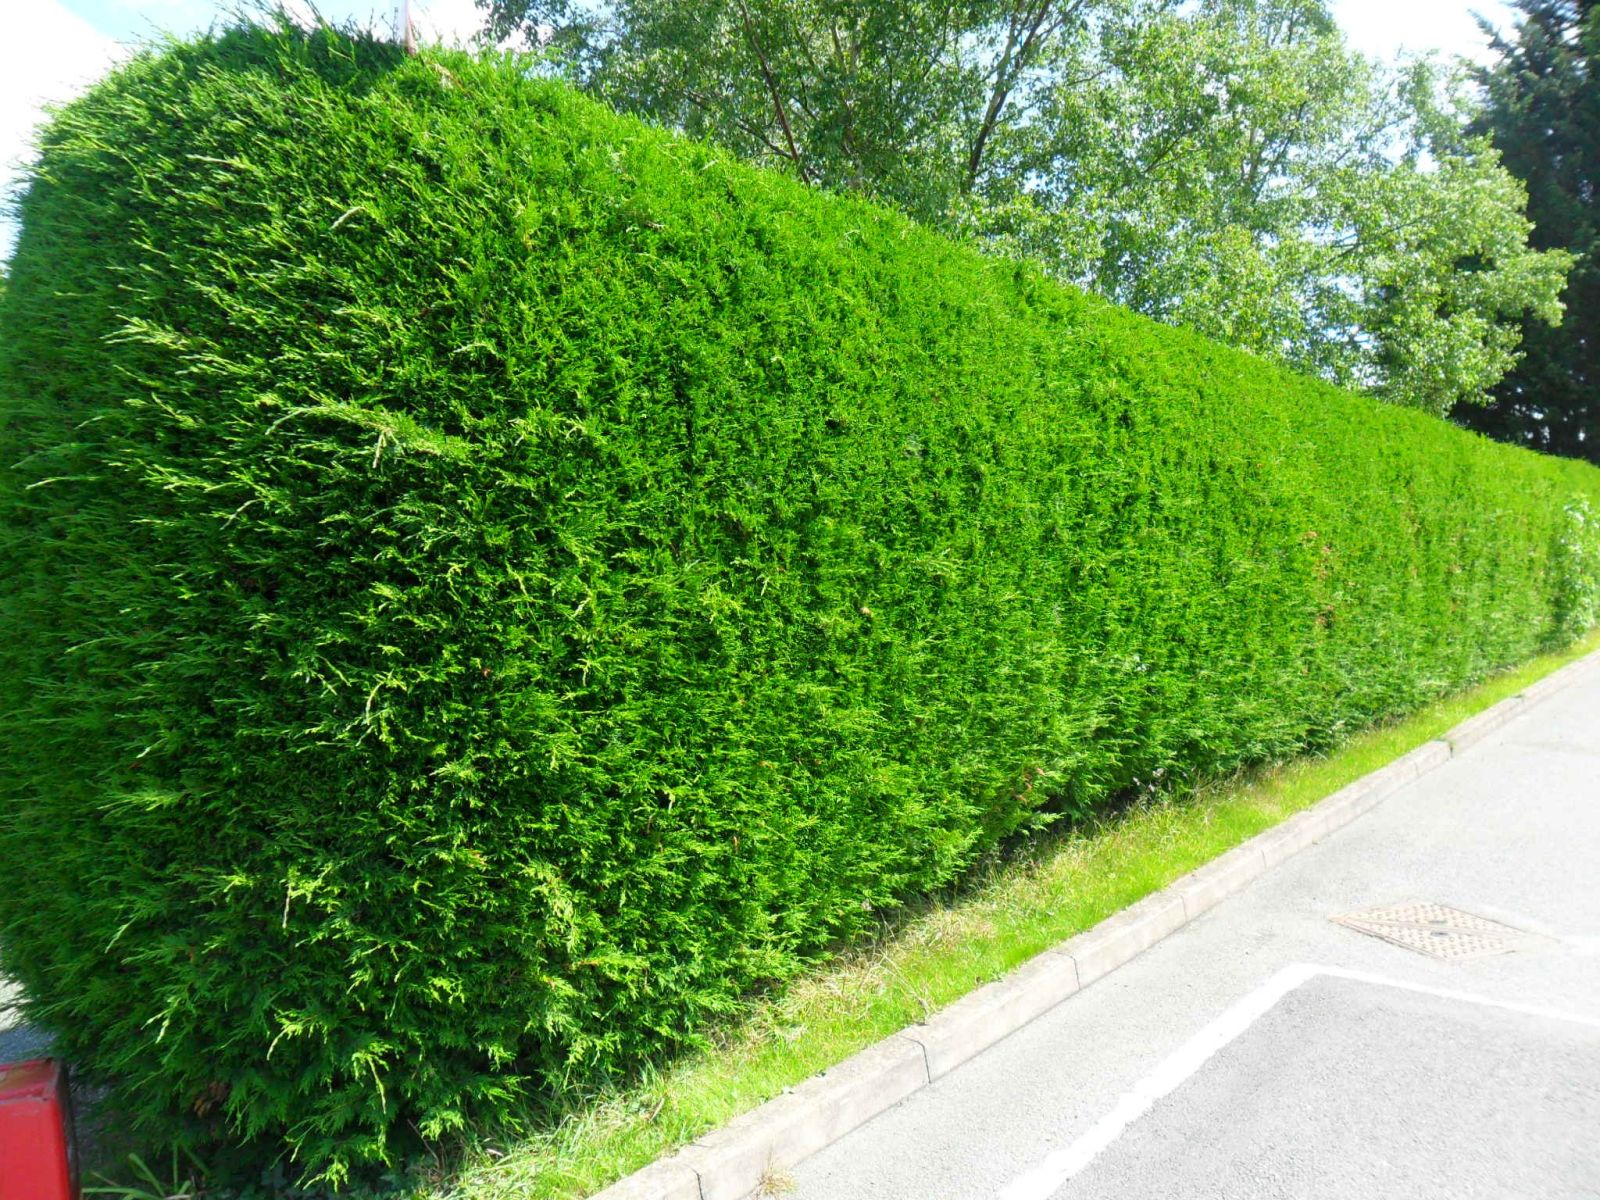 Now you’re just being silly, that a hedge, not a bush.